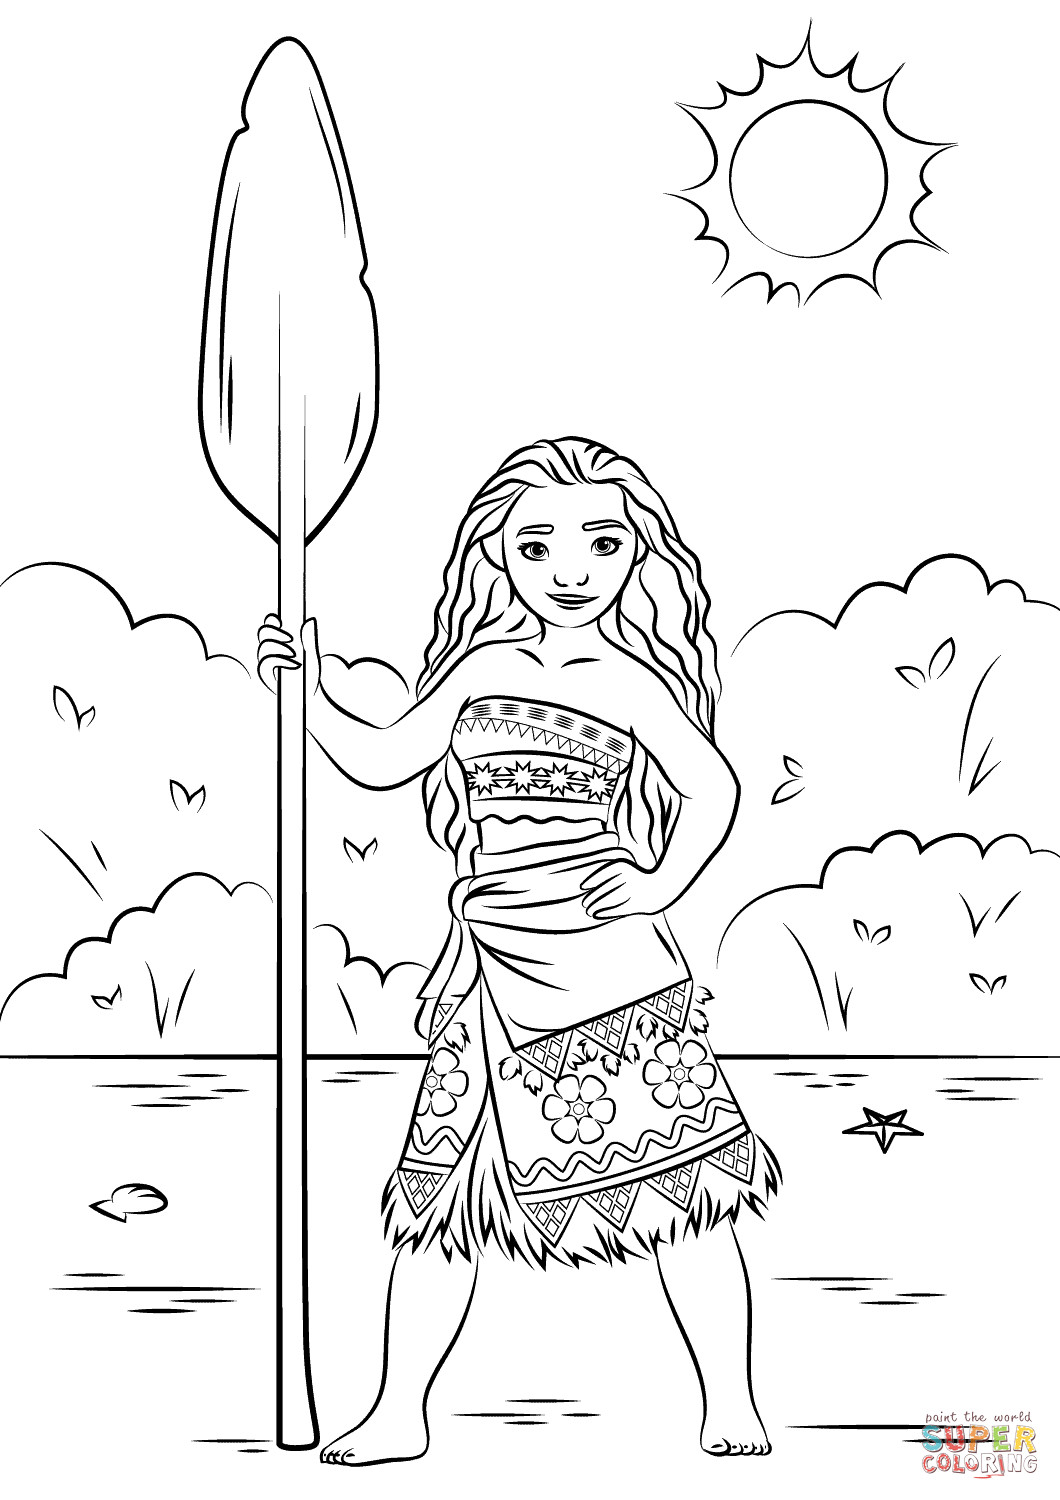 25 Of the Best Ideas for Kids Coloring Pages Moana - Home, Family ...